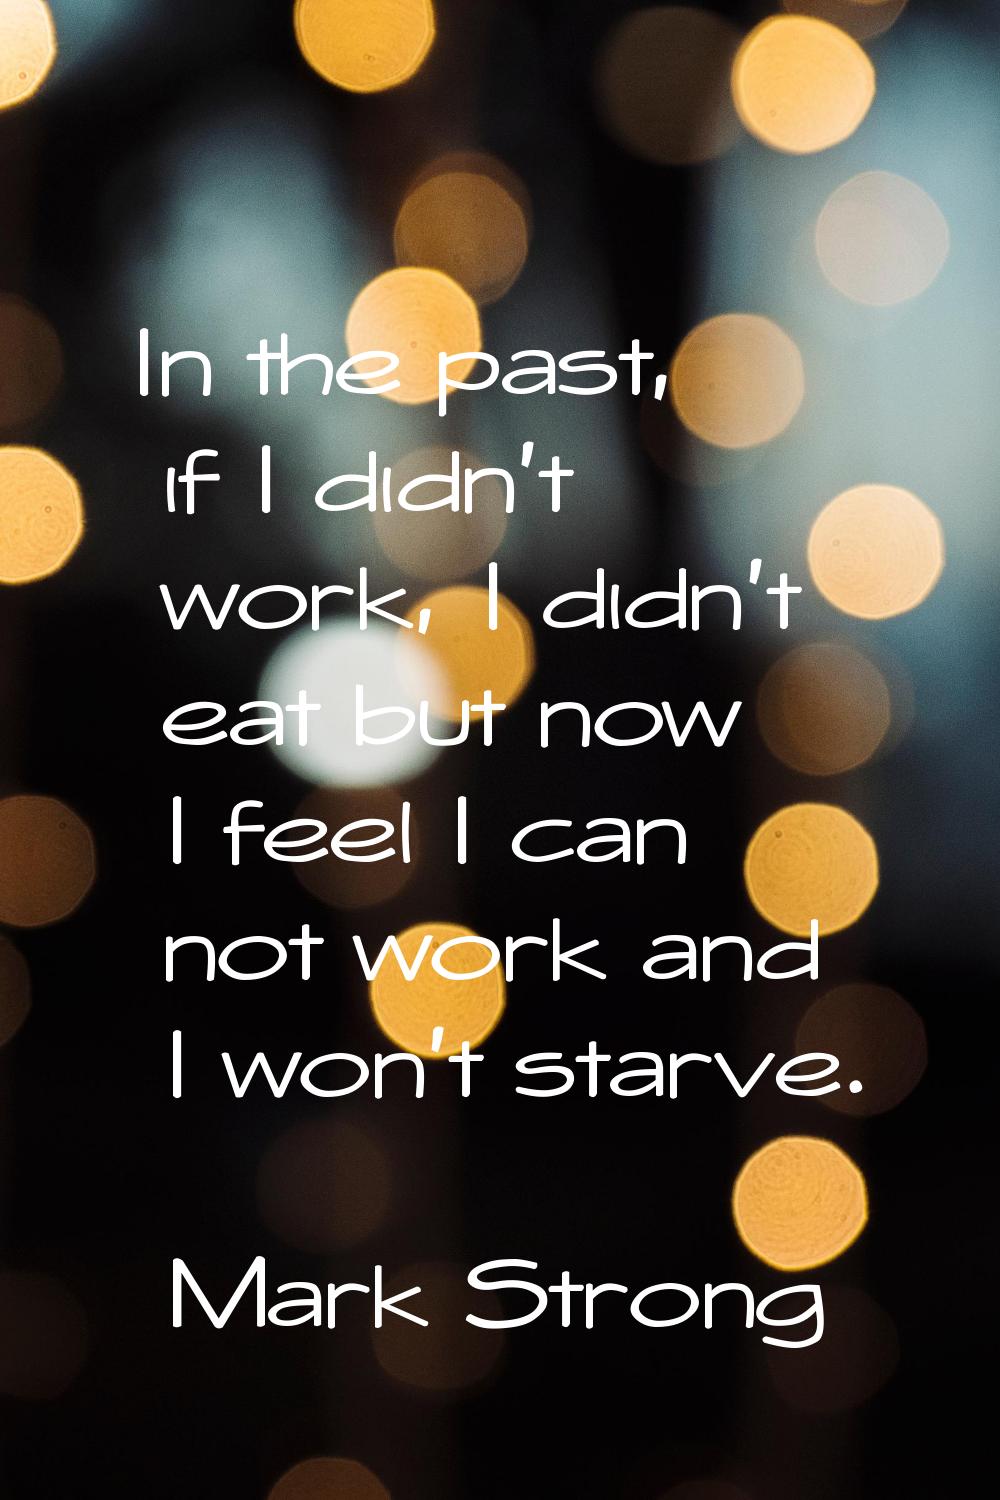 In the past, if I didn't work, I didn't eat but now I feel I can not work and I won't starve.